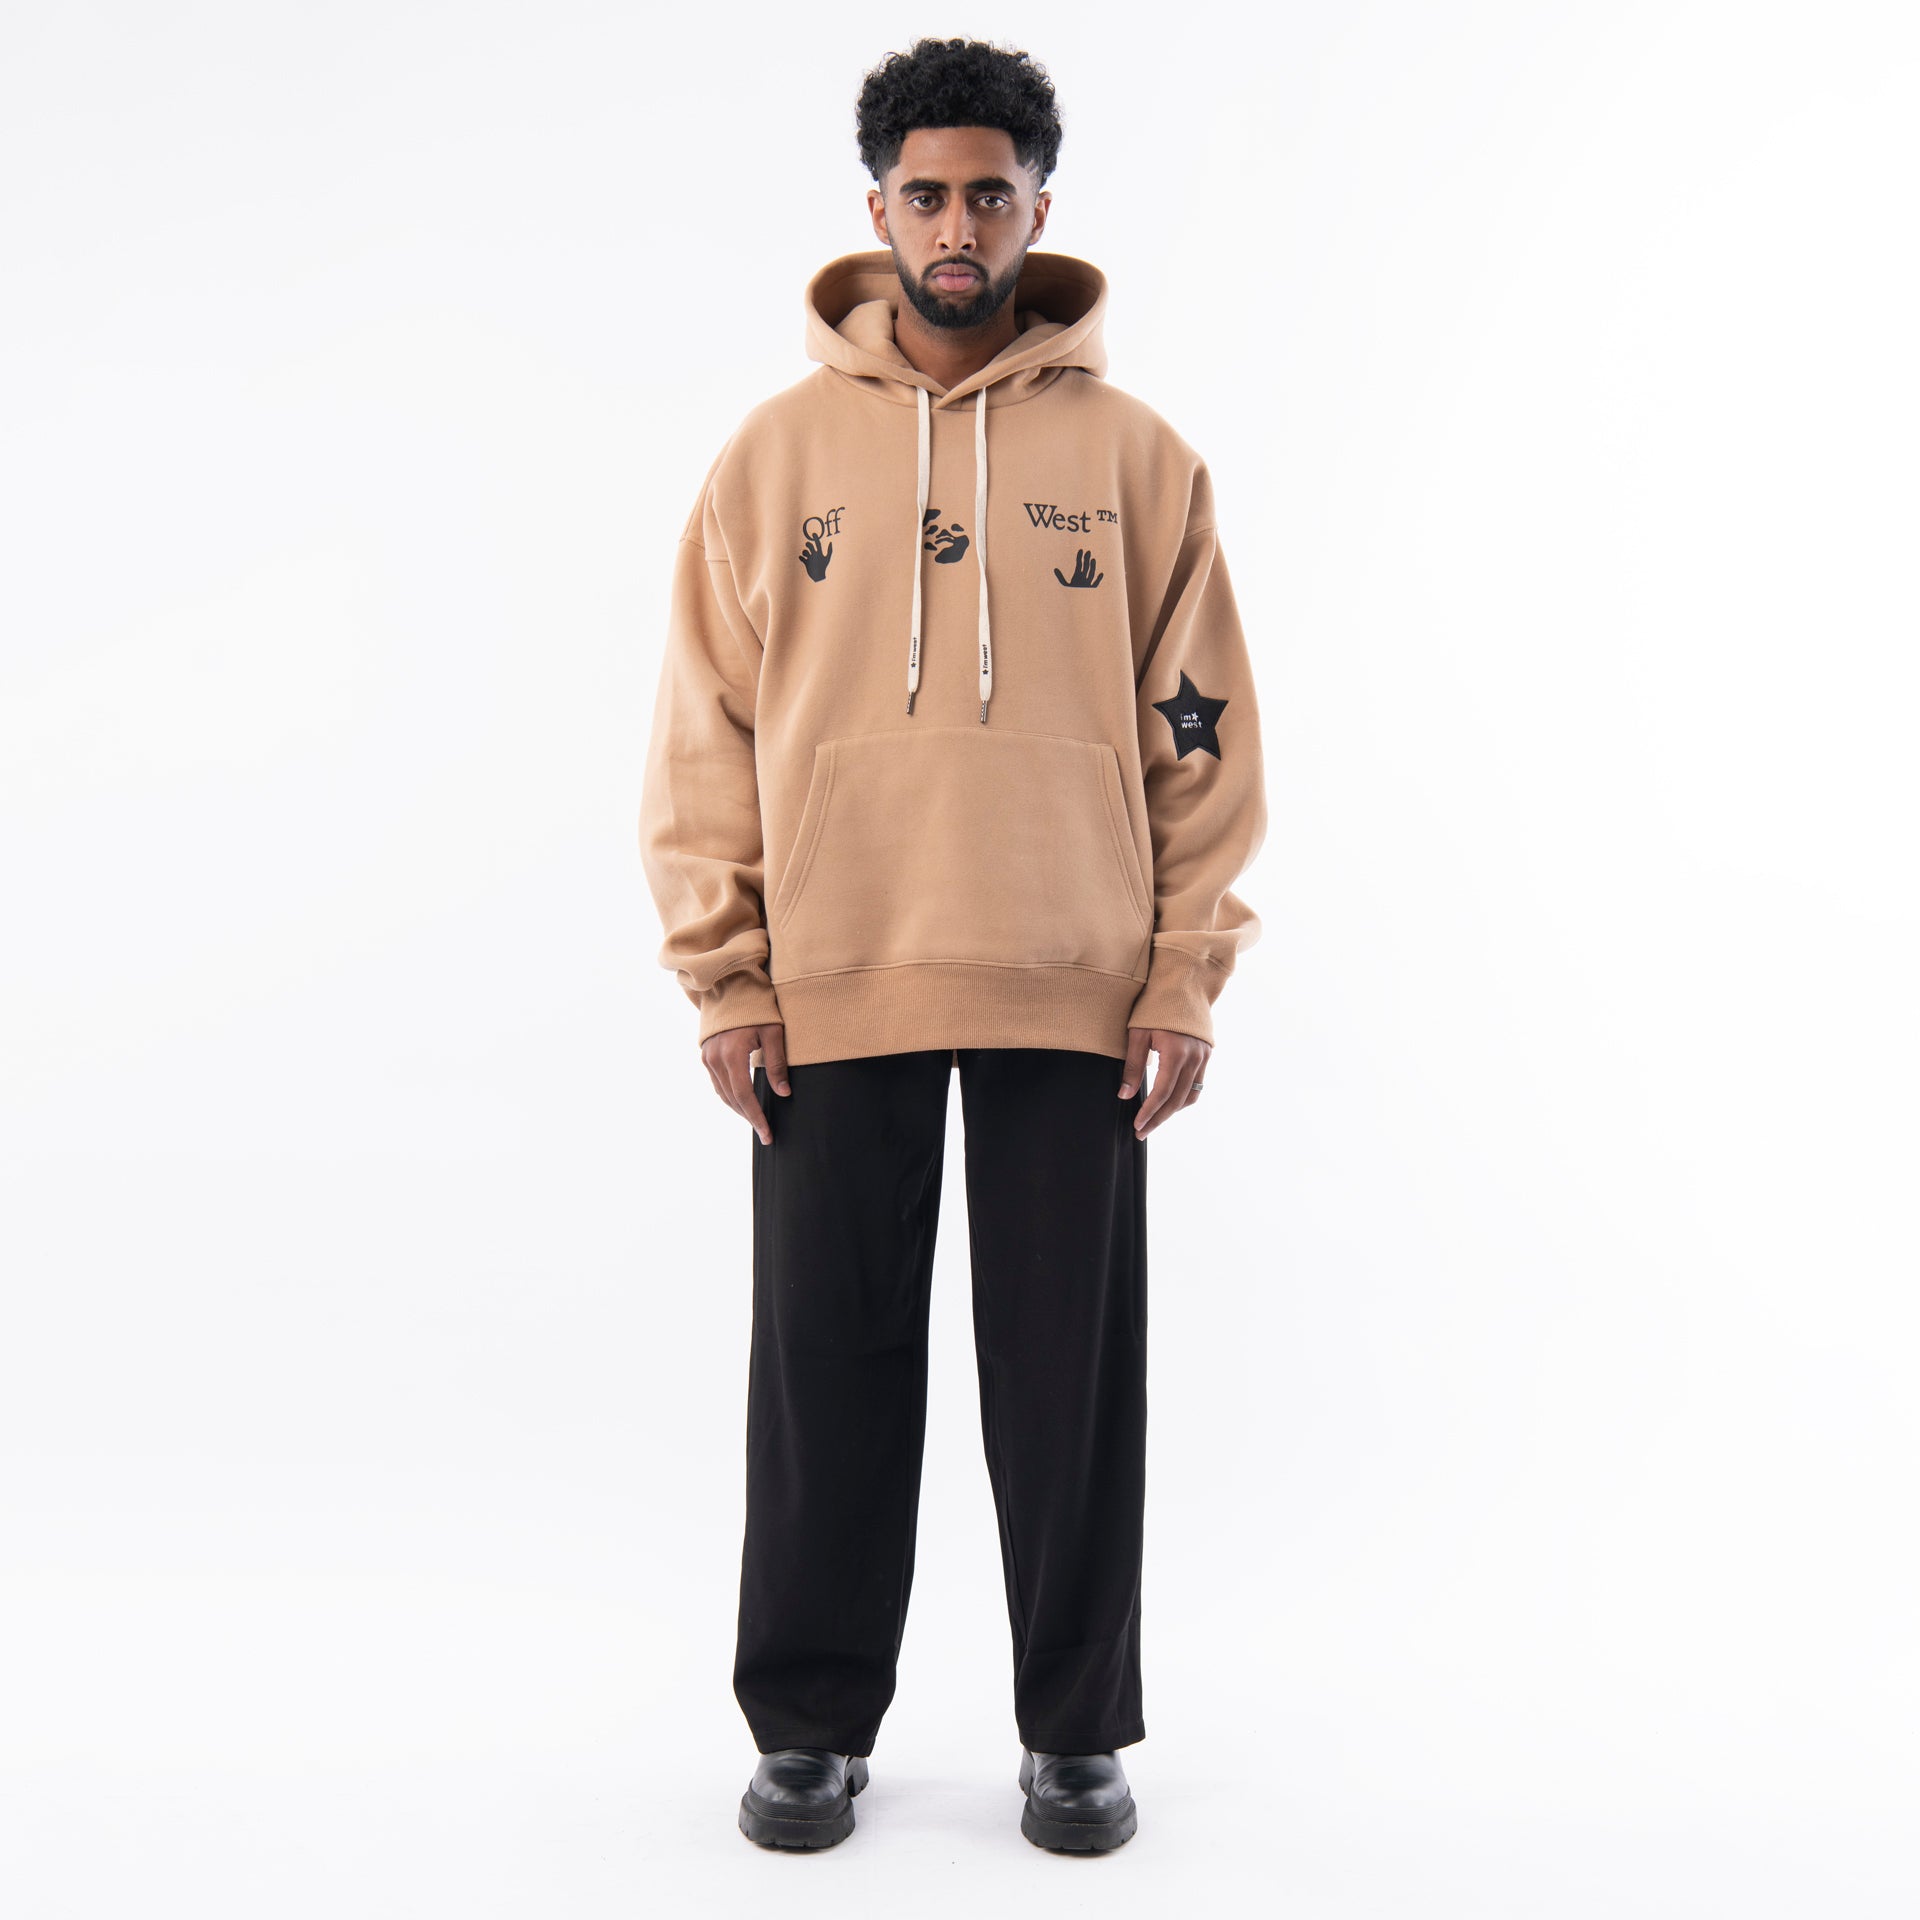 Beige Fake Hoodie From I'm West